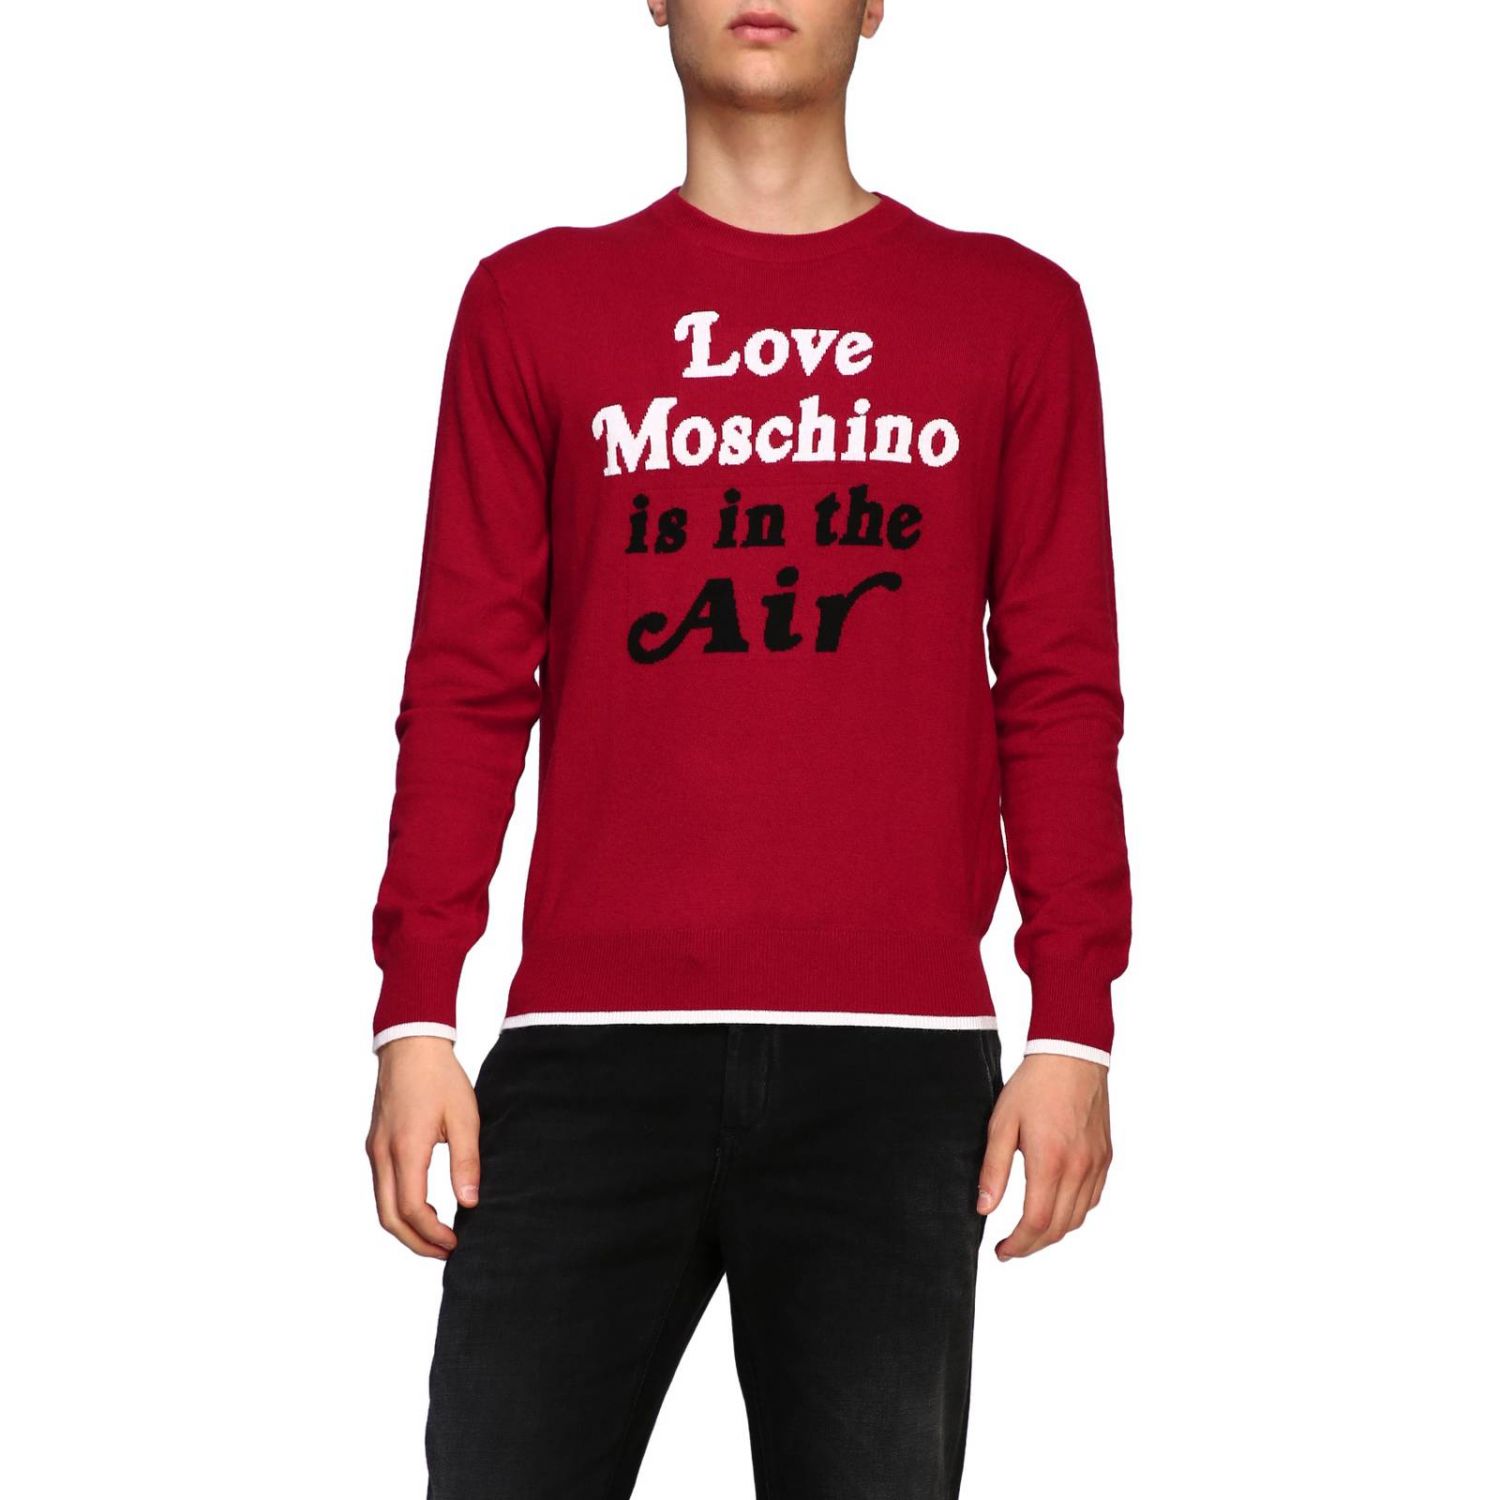 love moschino red jumper